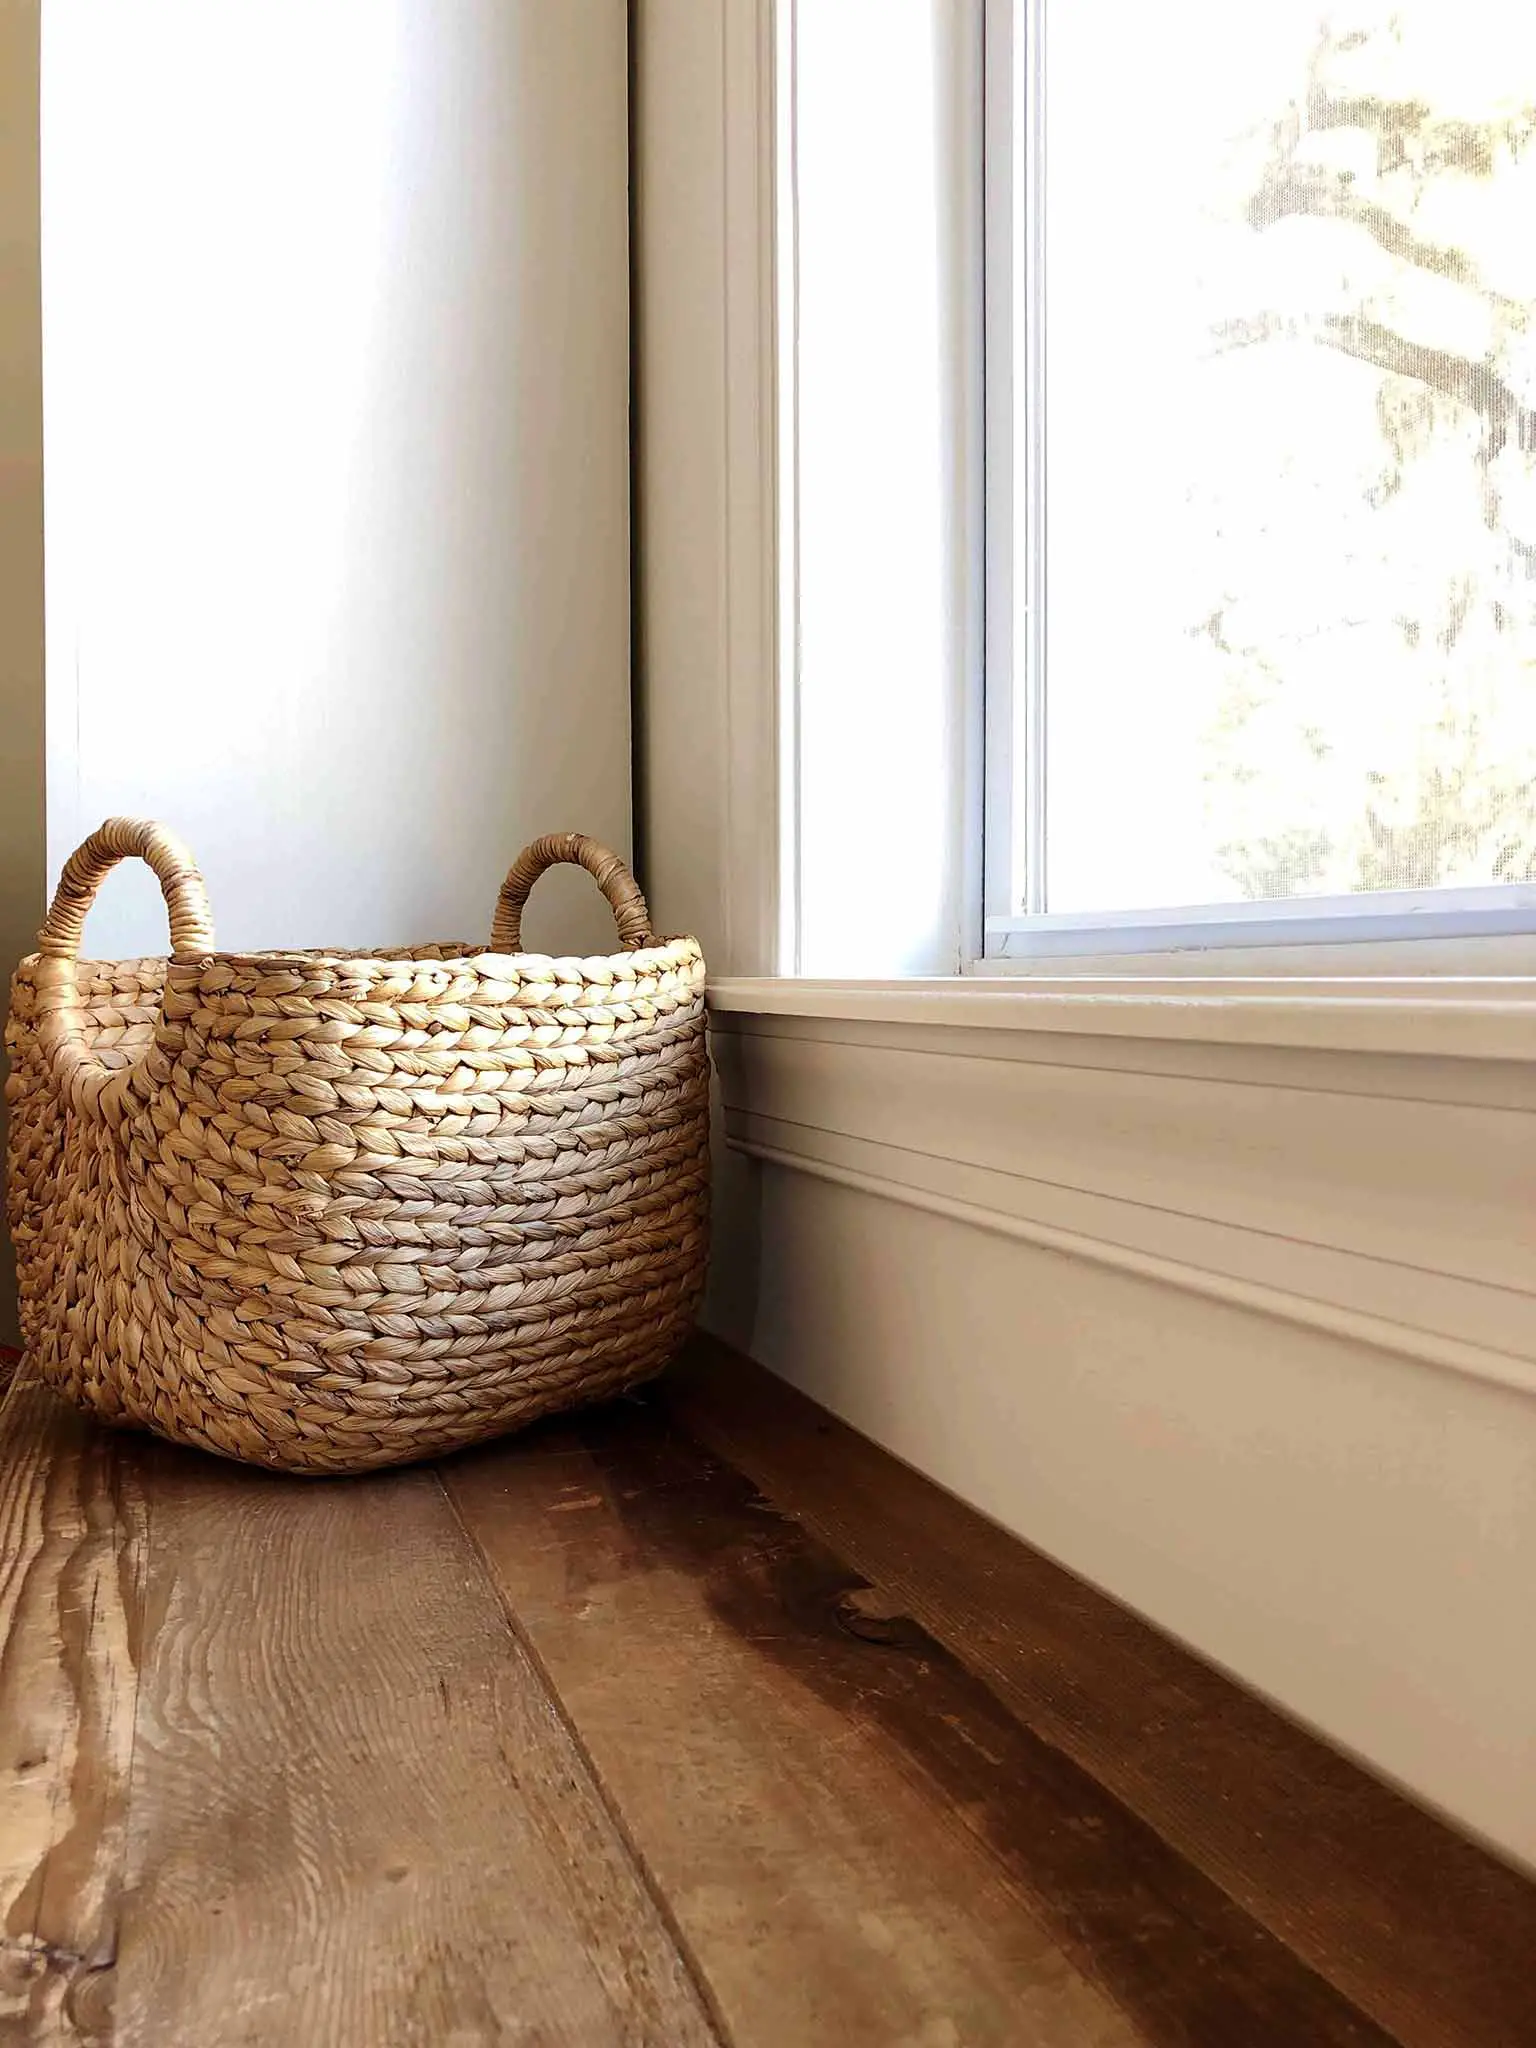 Basket on a window bench for toy storage